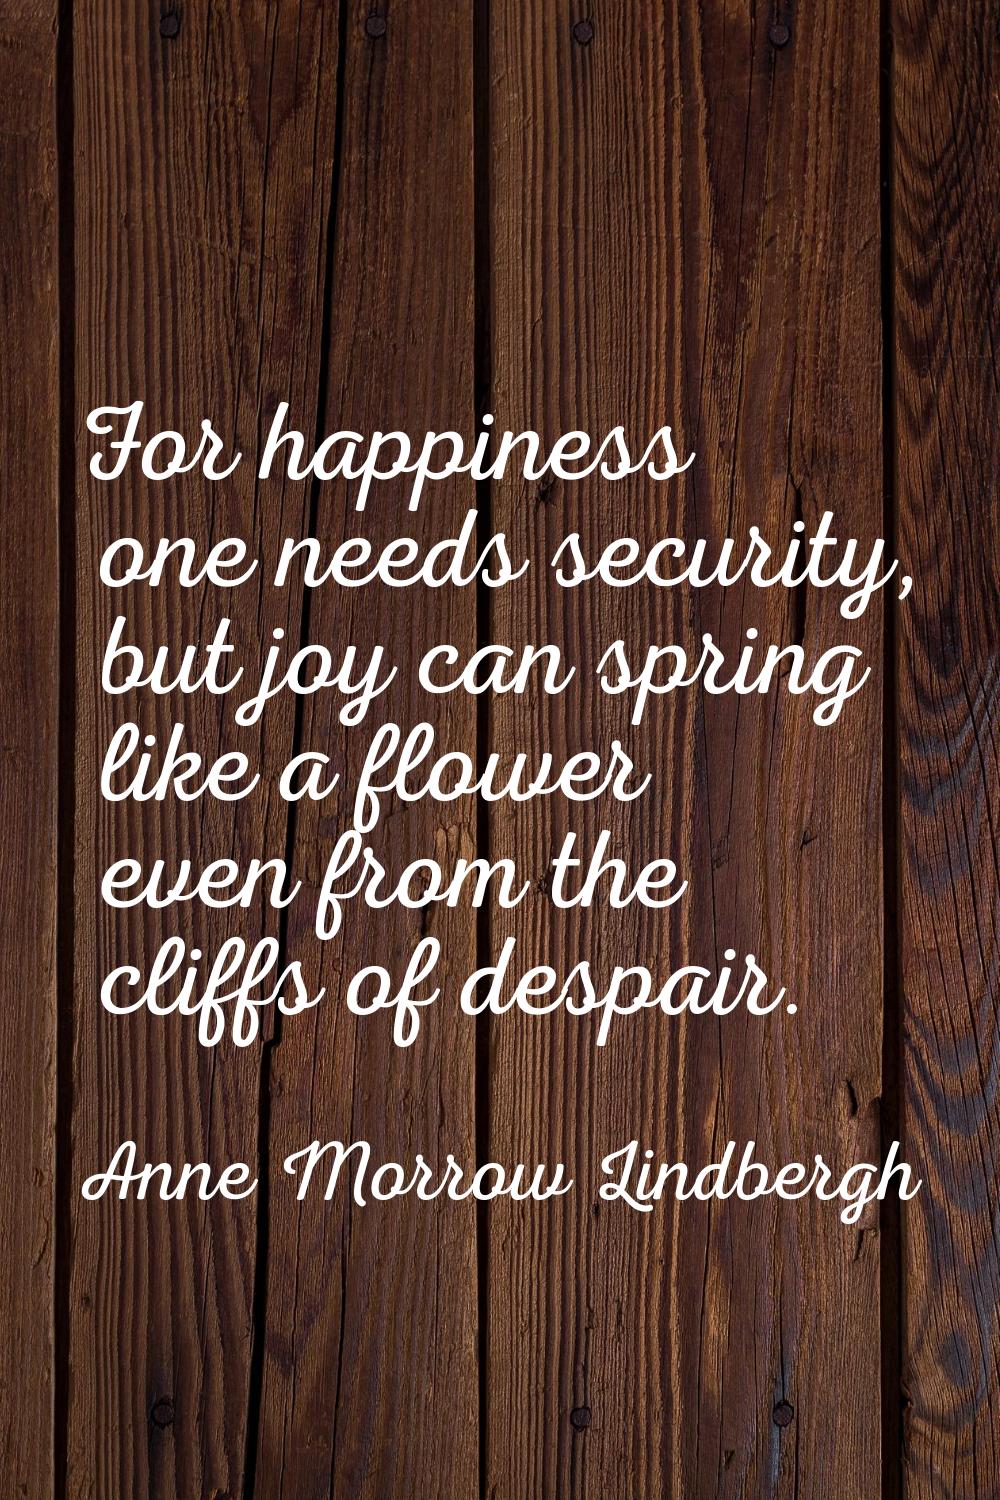 For happiness one needs security, but joy can spring like a flower even from the cliffs of despair.